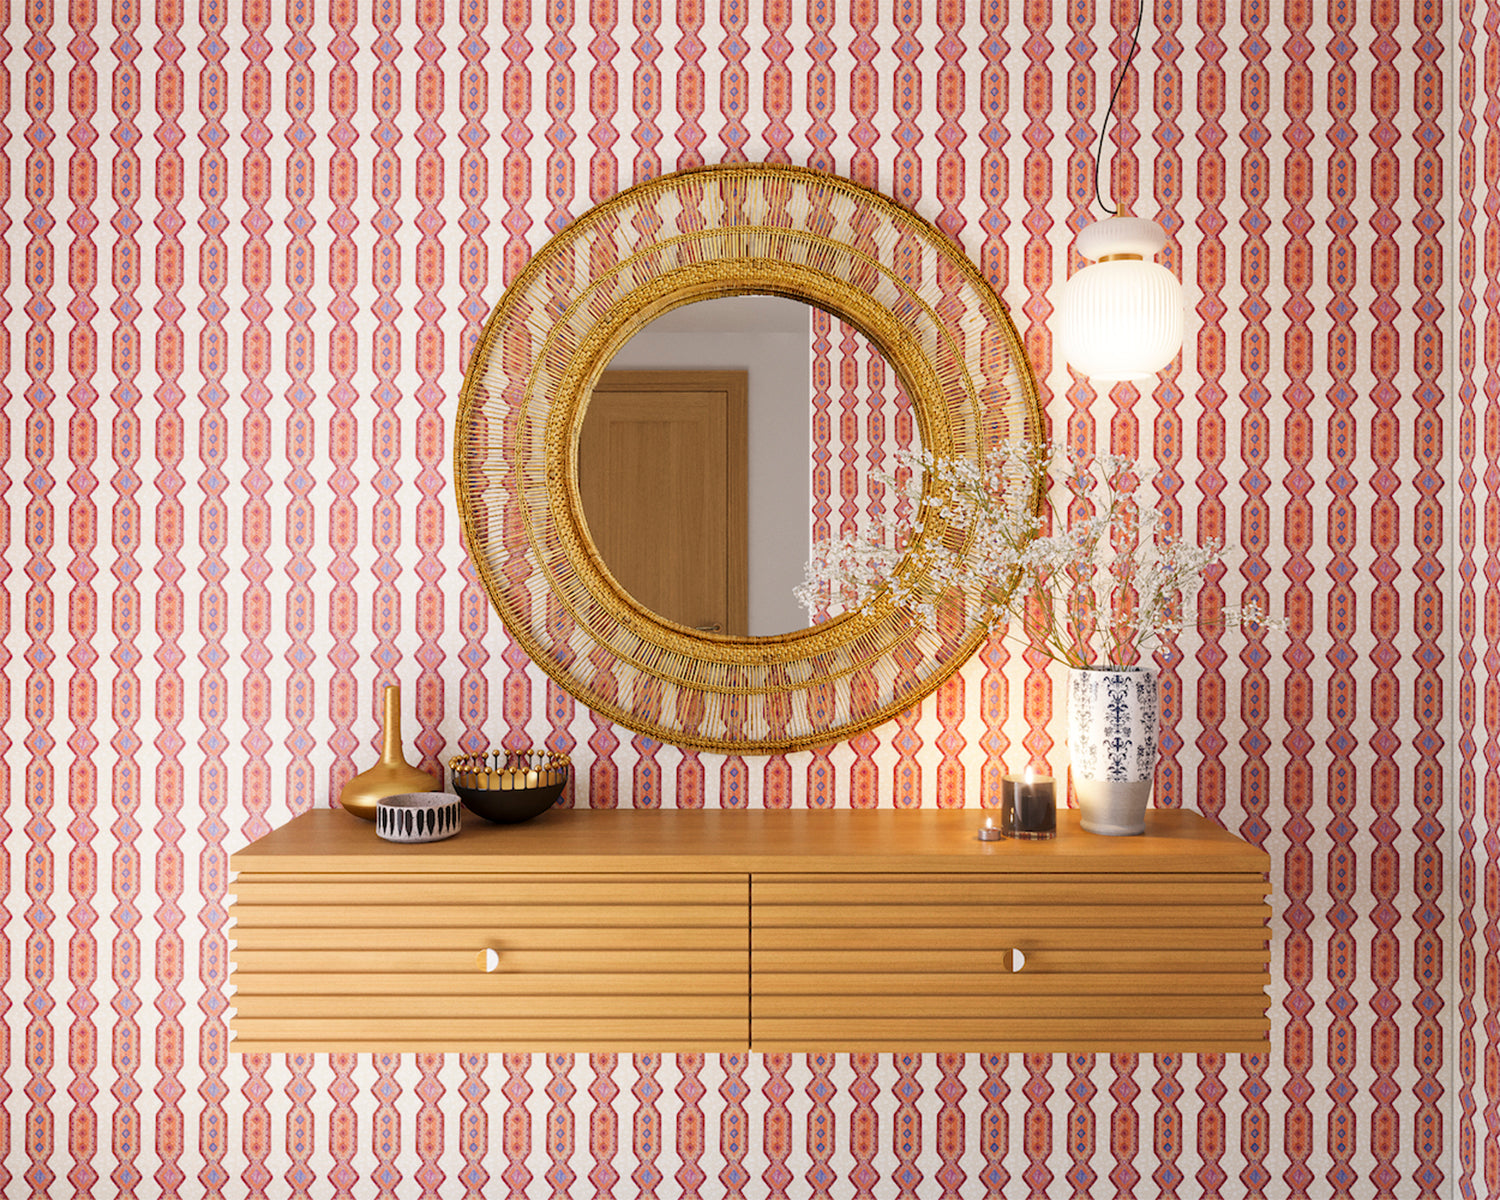 A floating shelf and statement mirror hang on a wall papered in a geometric stripe pattern in orange, blue, red and cream.